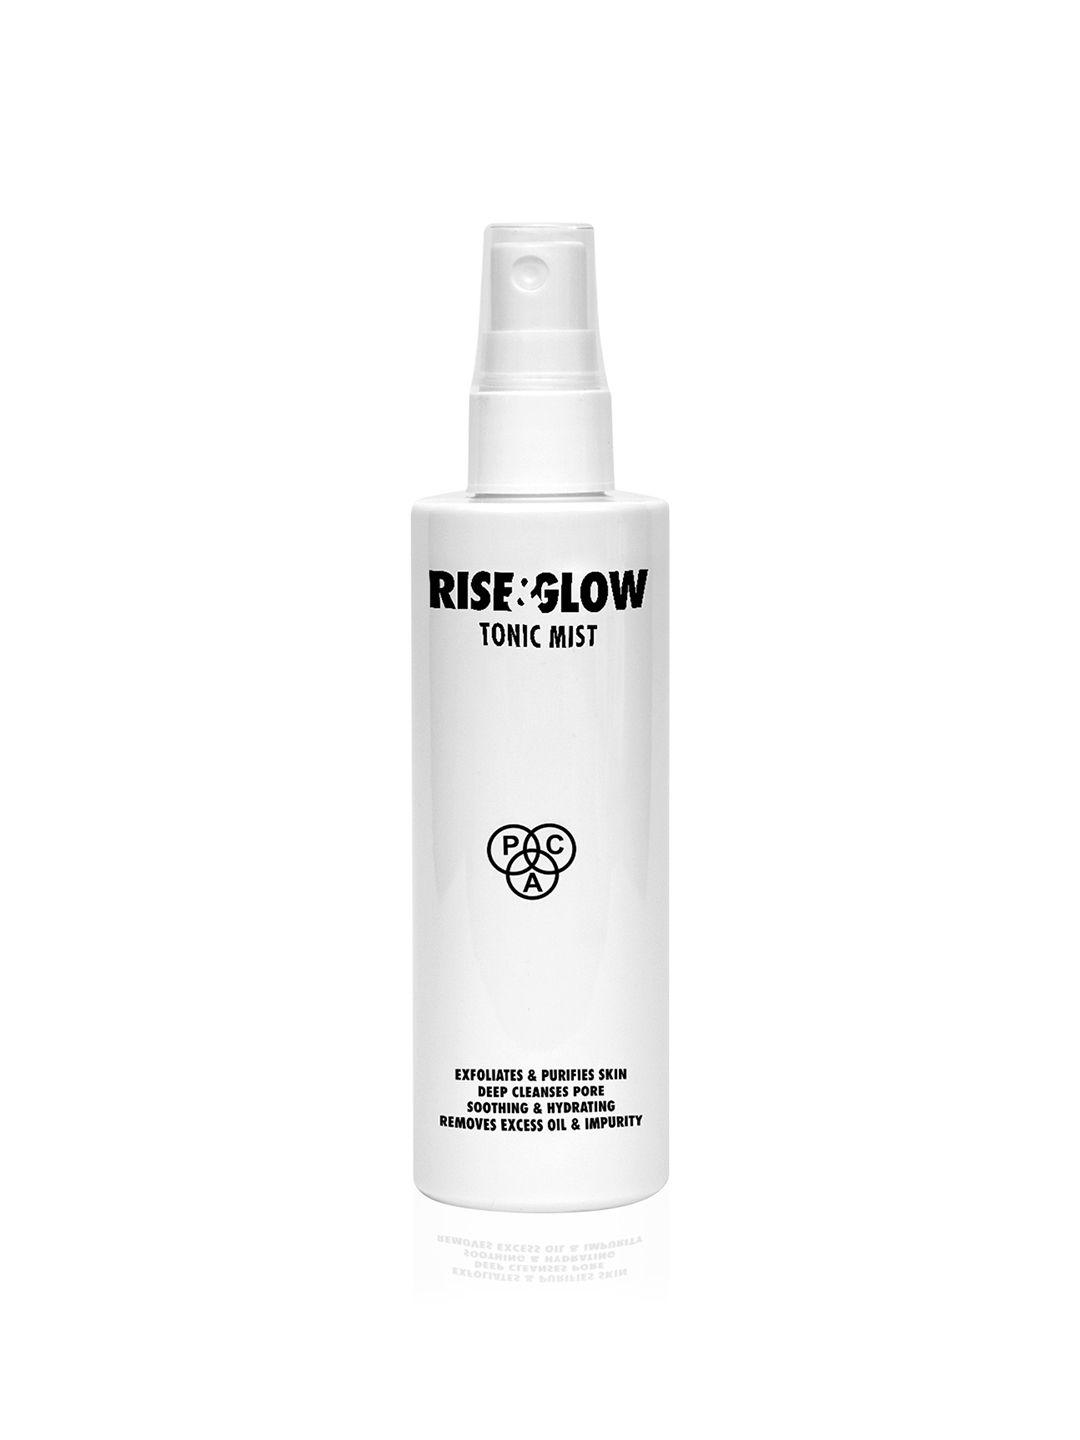 pac rise & glow tonic mist to remove excess oil & impurities - 120ml